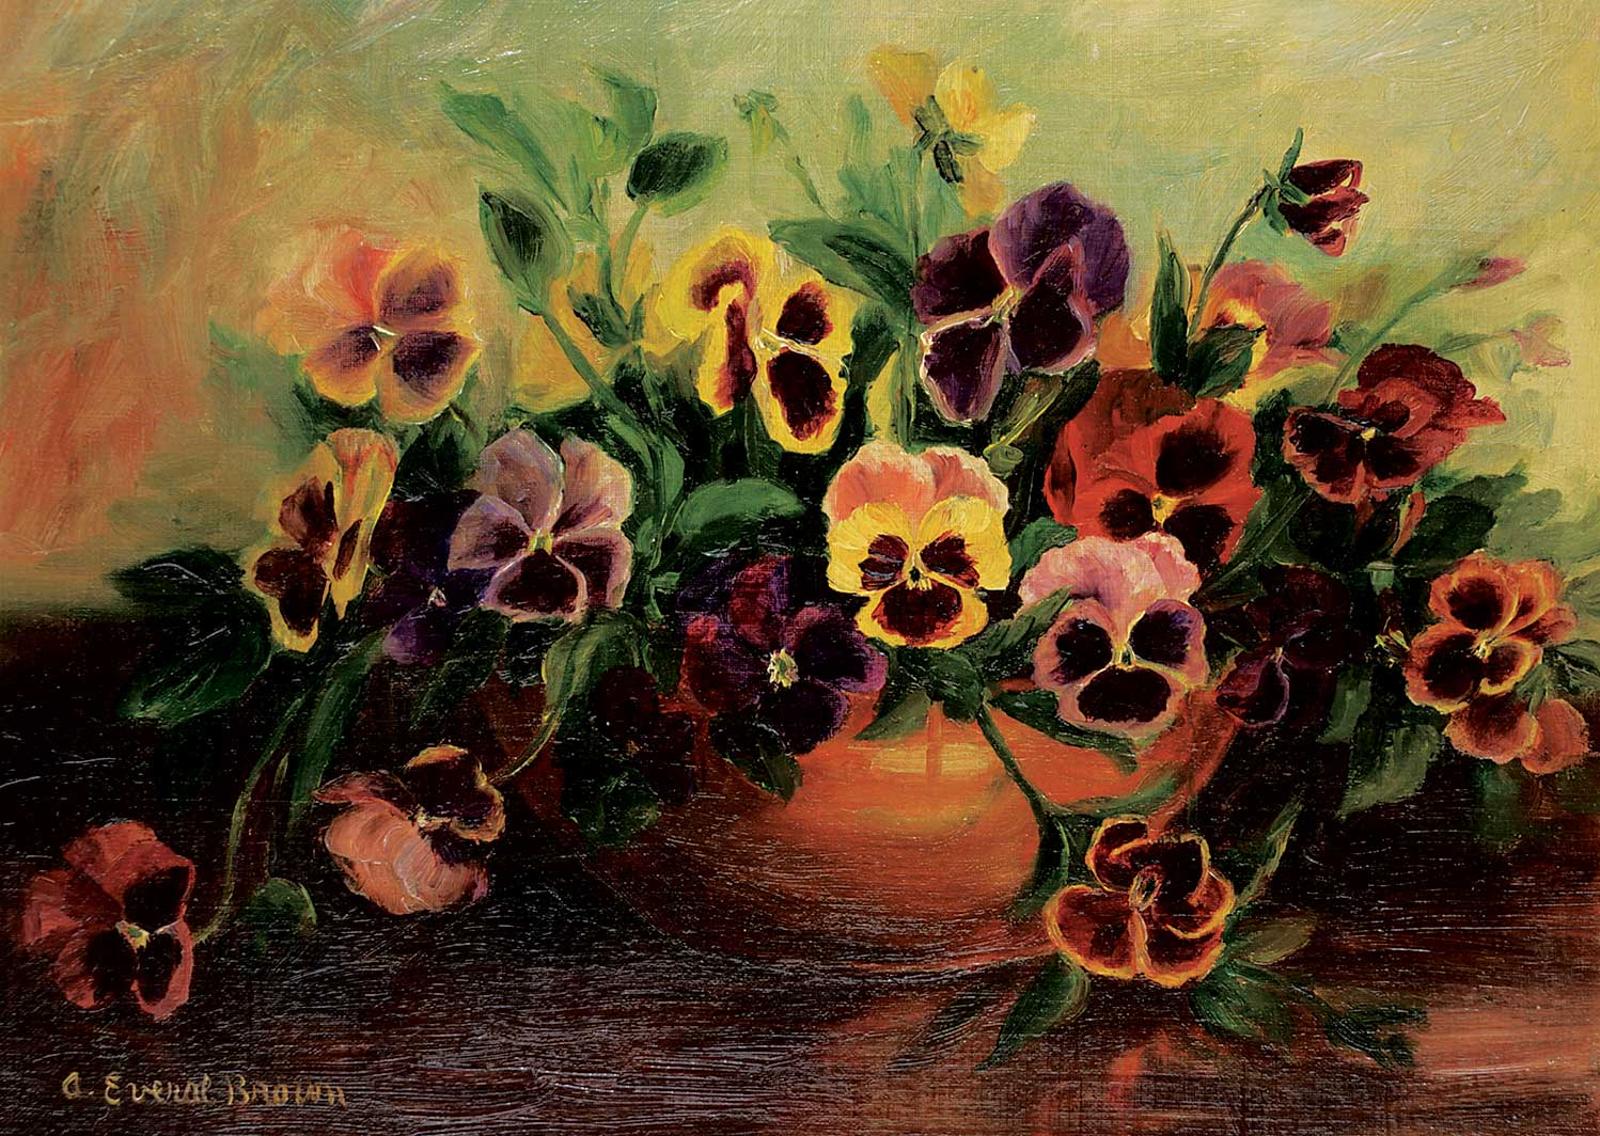 A. Everal Brown - Untitled - Overflowing Flowers